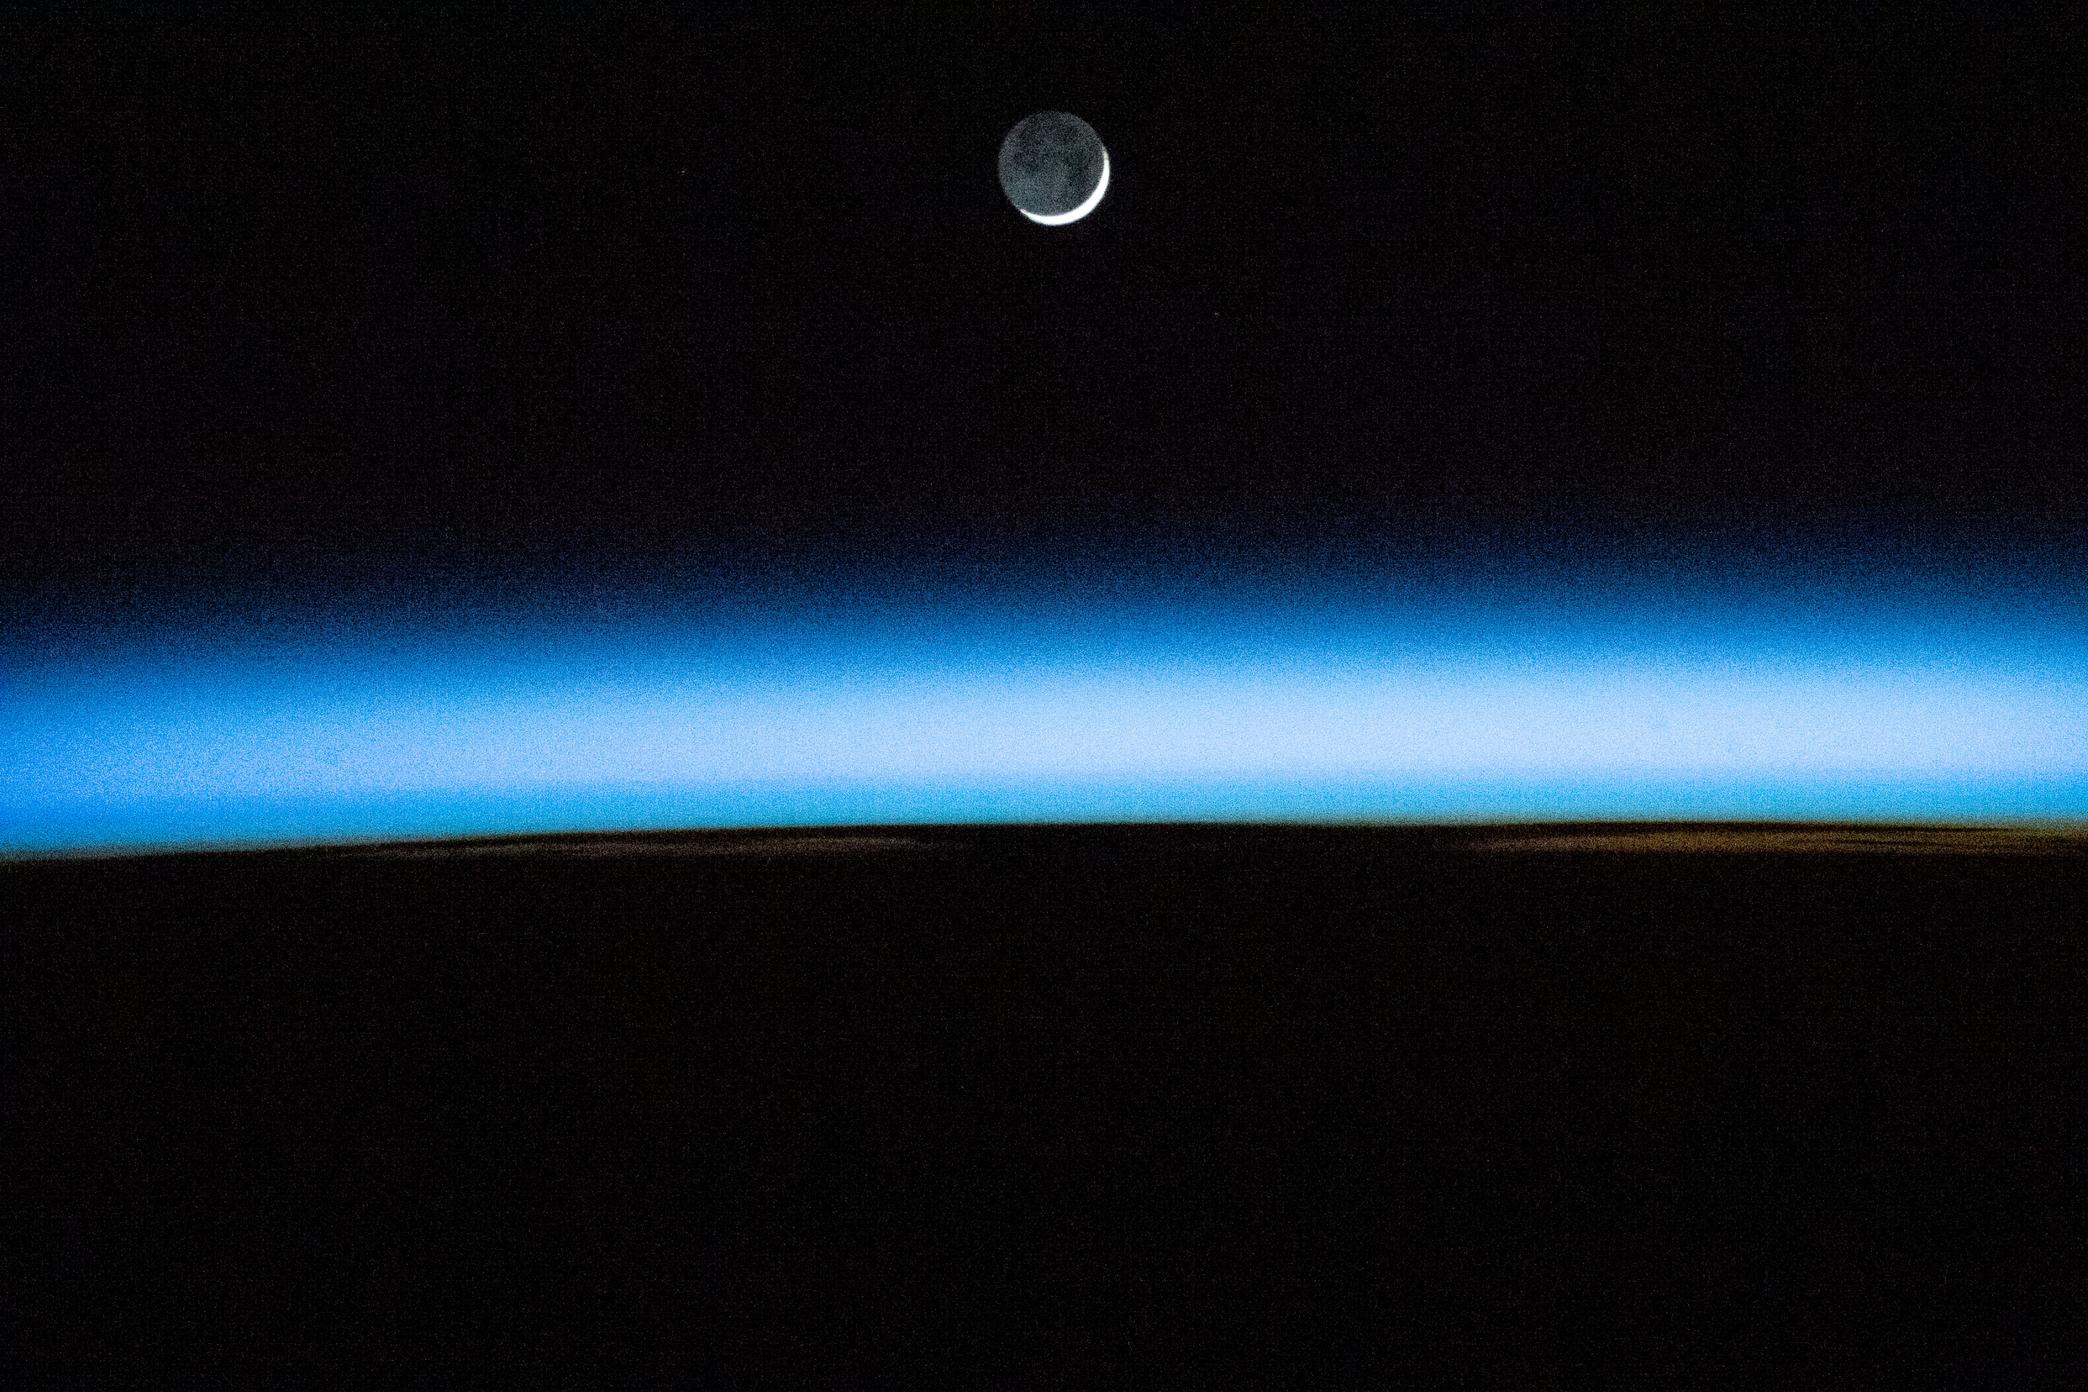 The waxing crescent Moon above Earth's atmosphere